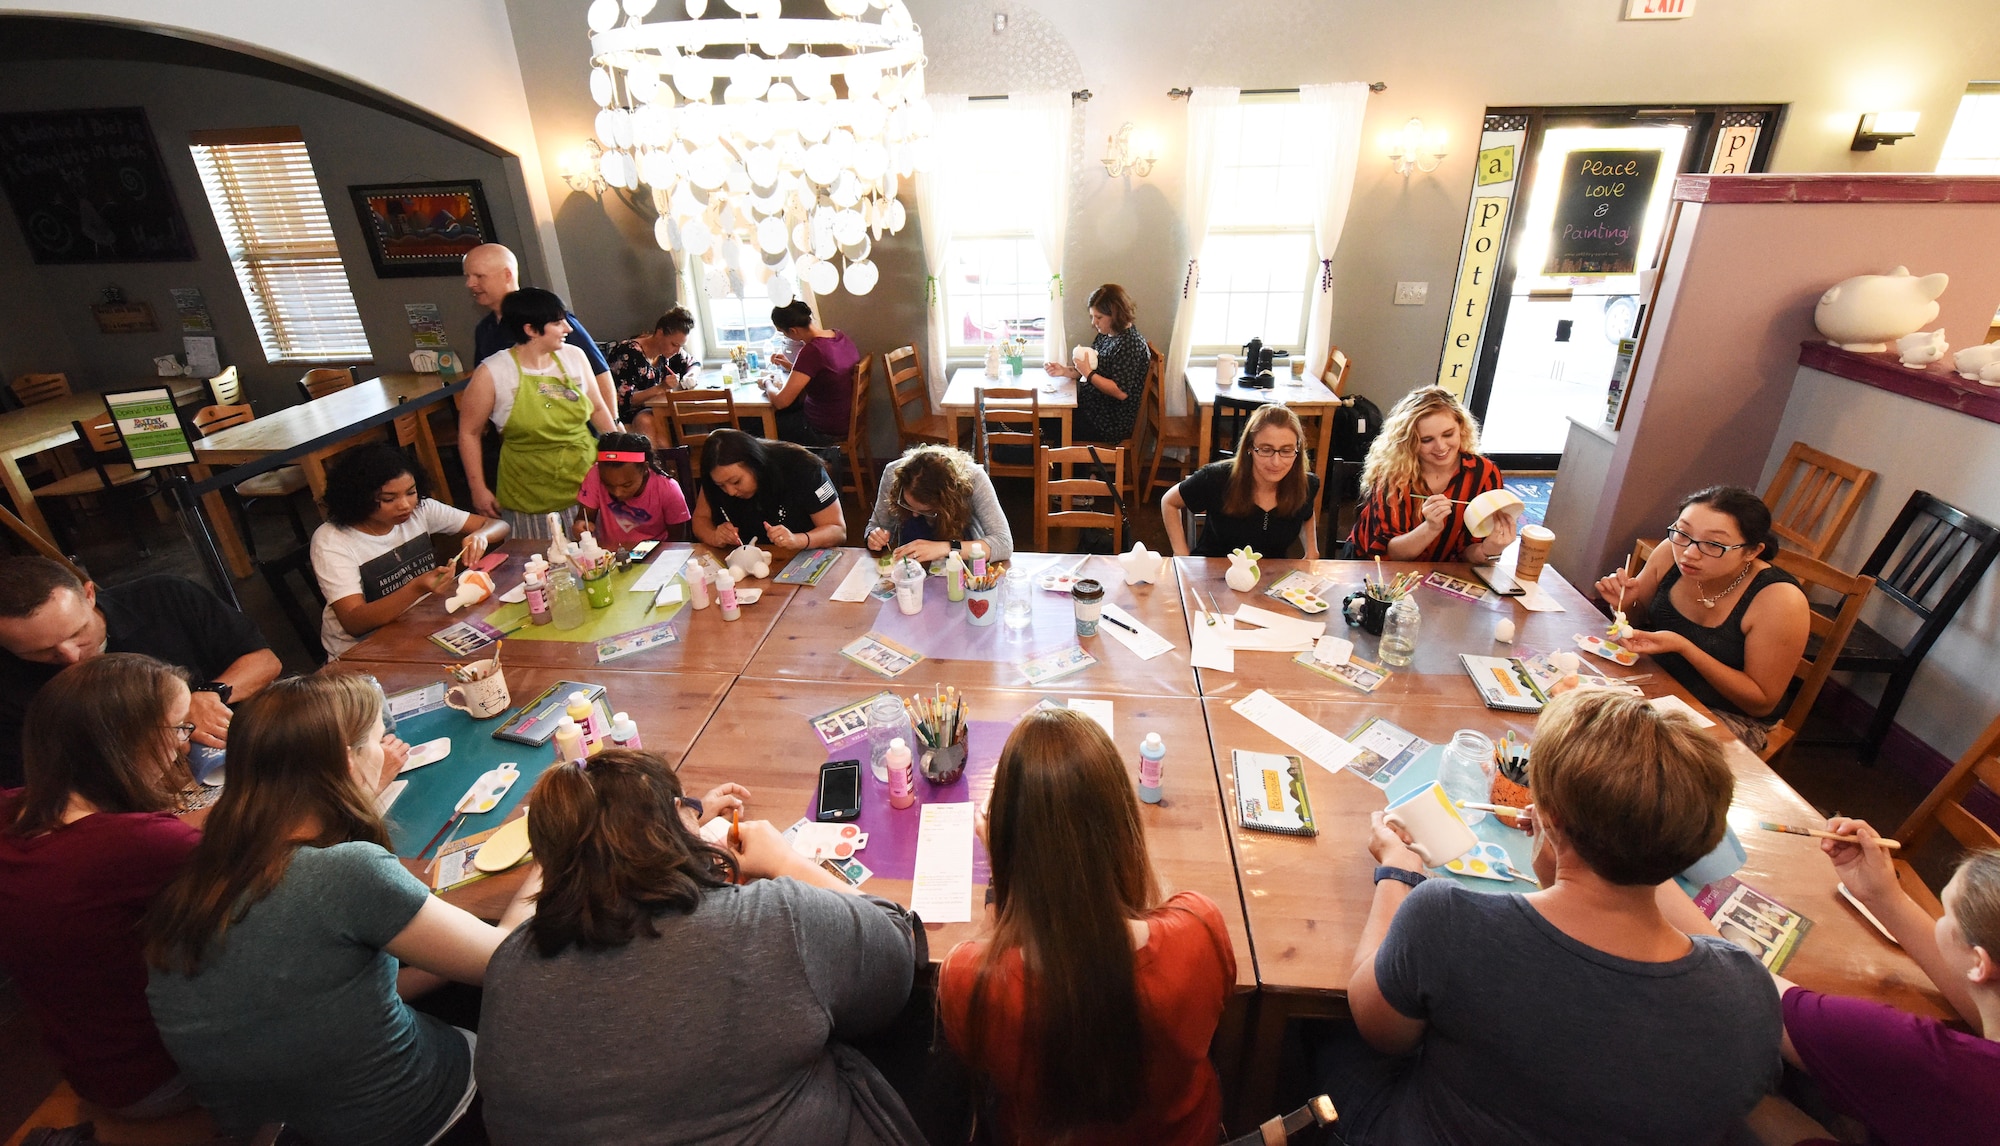 Spouses of deployed and remote Airmen and base members gather and paint various pieces of pottery in Rapid City, S.D., June 26, 2018. The 28th Bomb Wing Chapel hosted an event where spouses came out to paint pottery and form a network with other spouses. (U.S. Air Force photo by Airman 1st Class Thomas Karol)